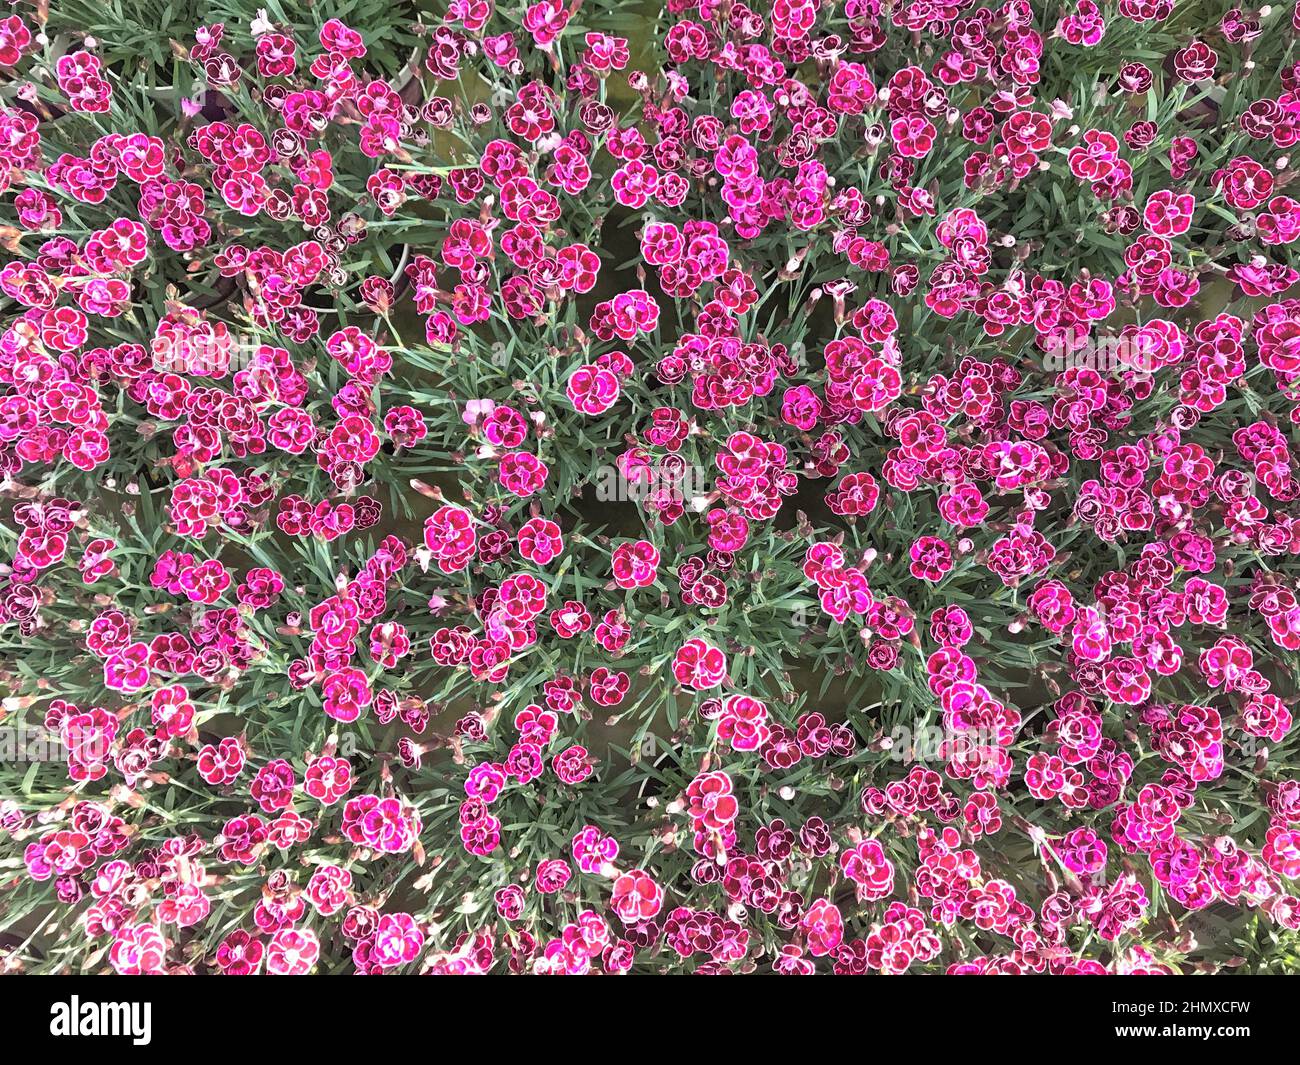 Bright carpet of small flowers garden carnation color dark pink, fuchsia and Burgundy with white edging with green leaves as the background. Stock Photo